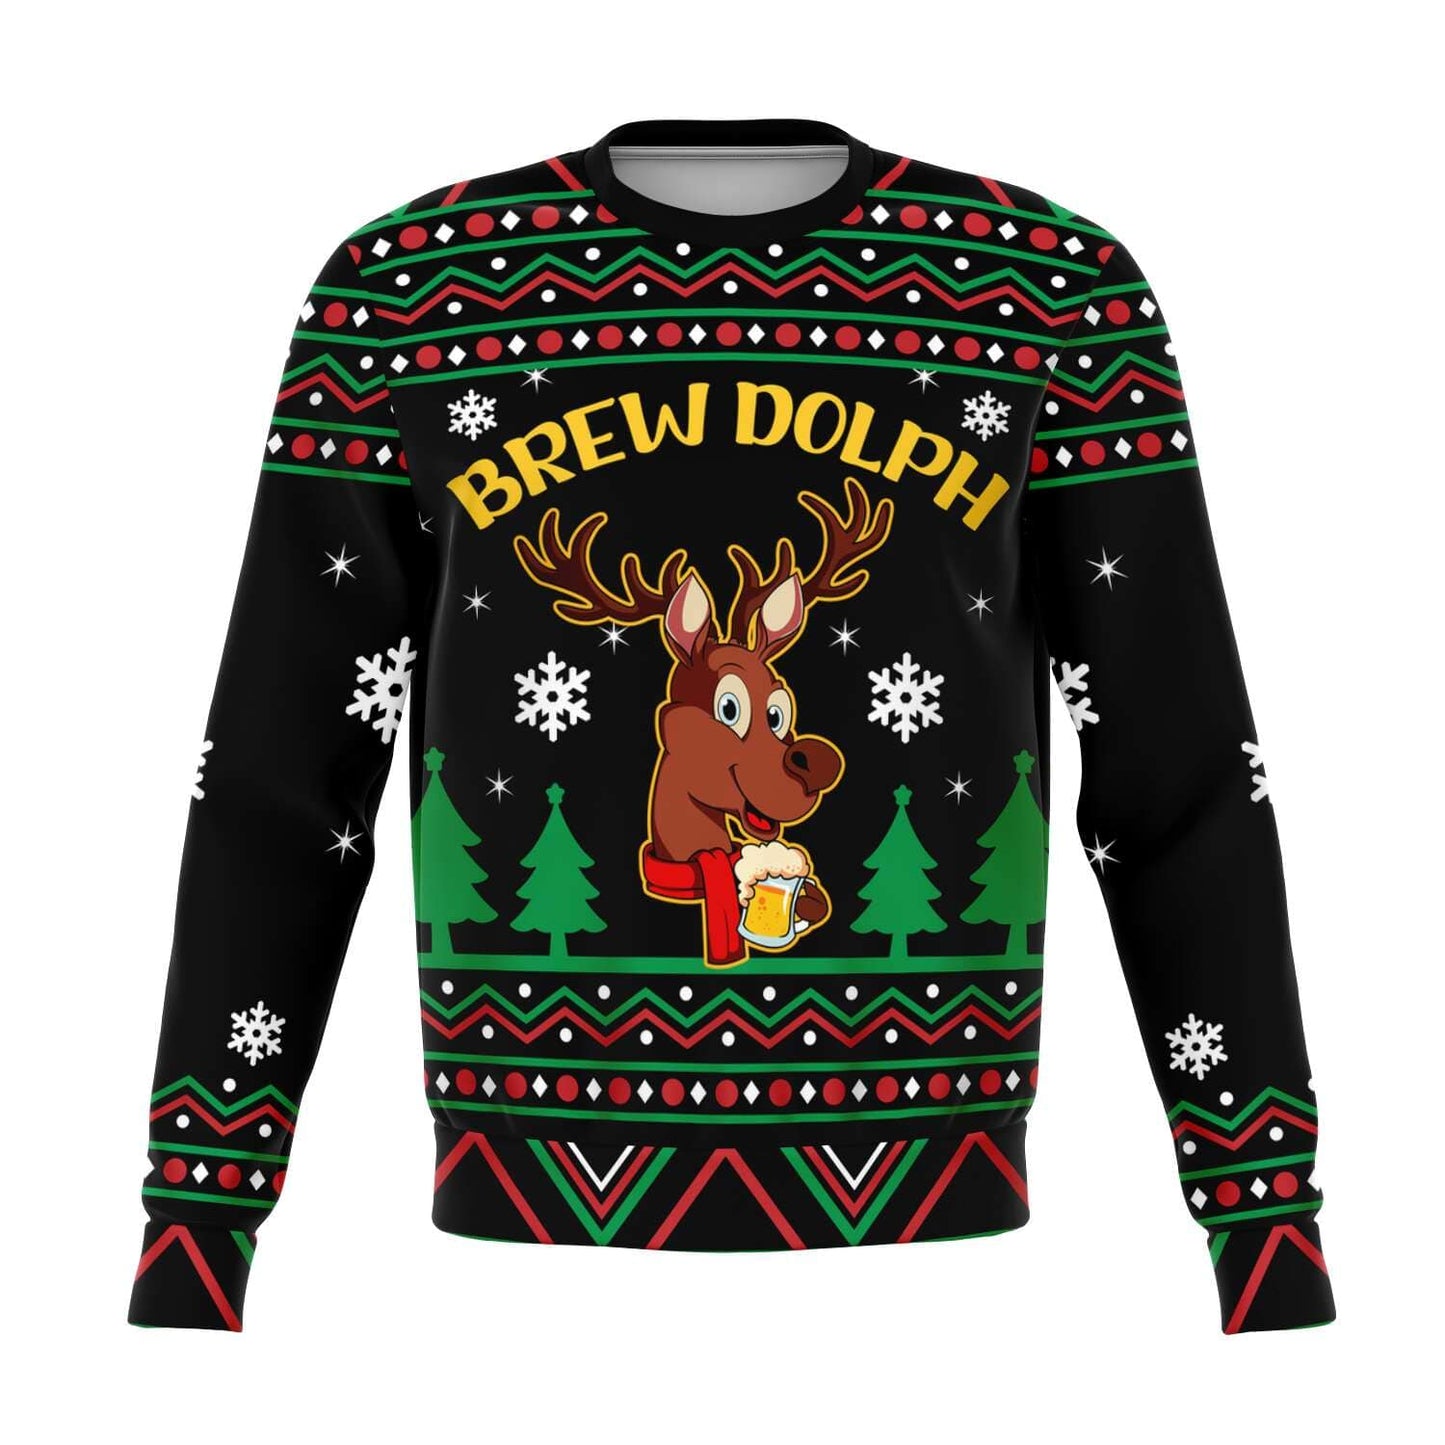 SUBLIMINATOR Brew Dolph Ugly Christmas Sweater Sweatshirt XS SBSWF_D-4561-XS